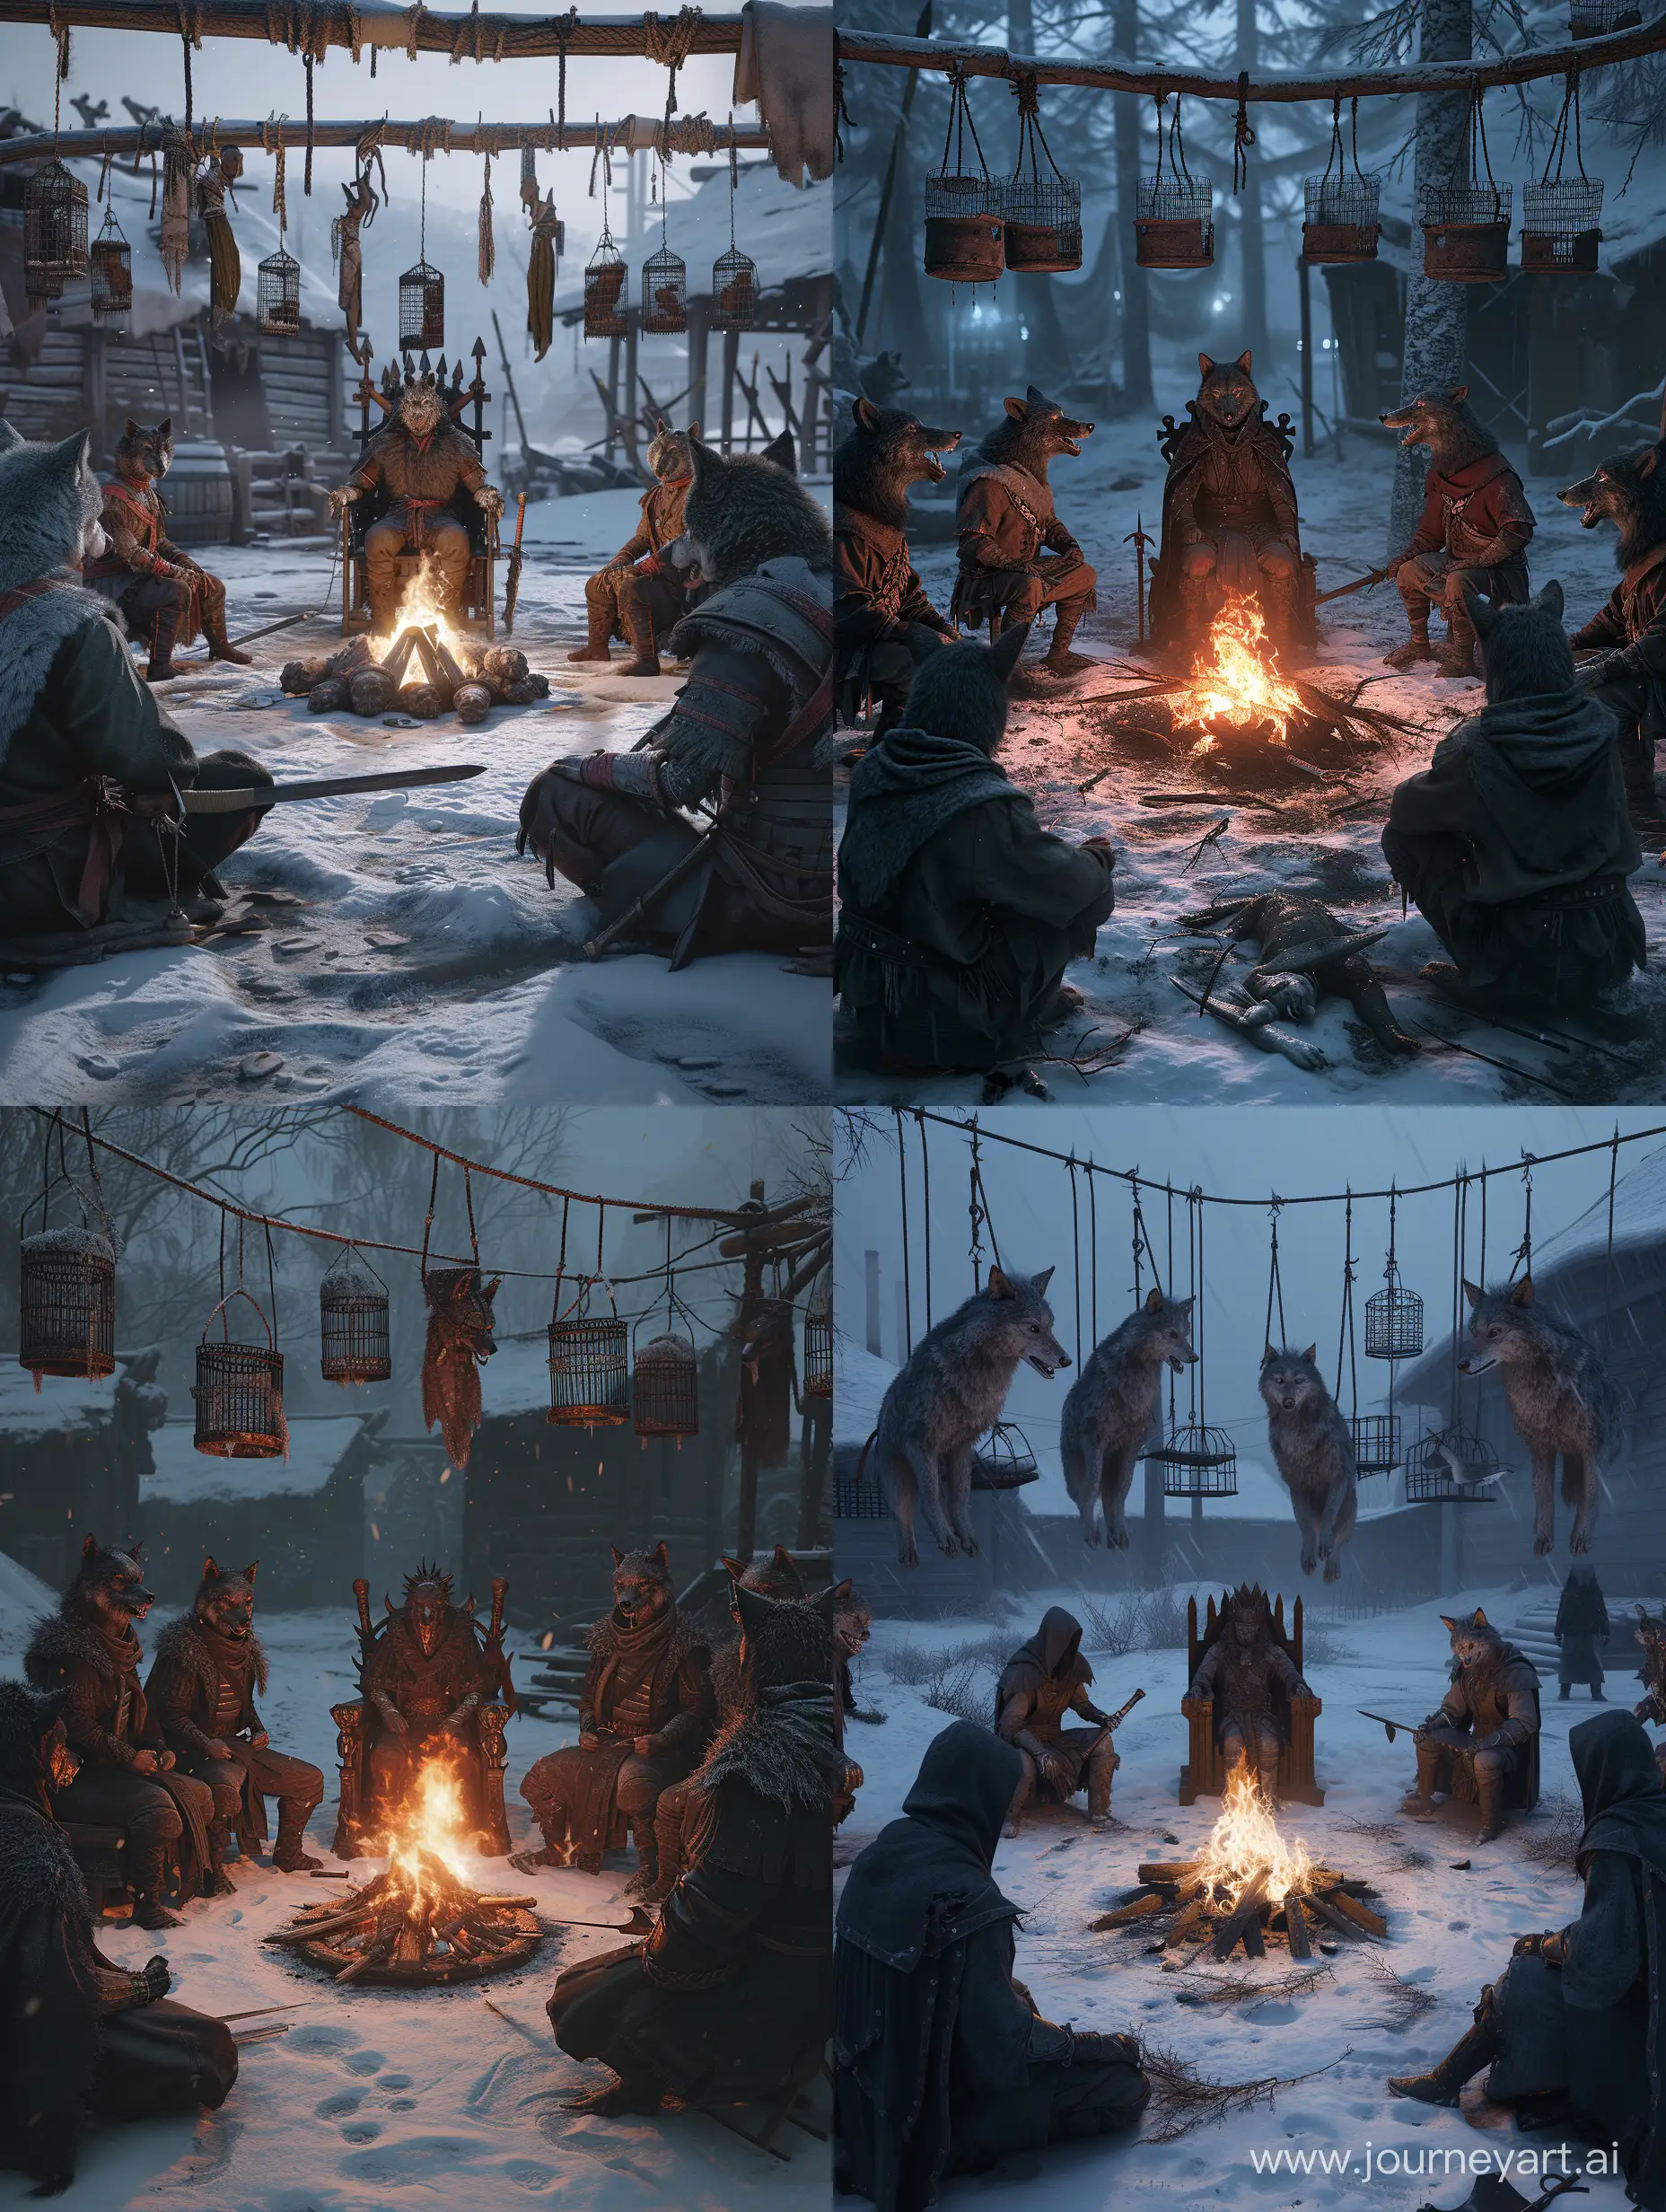 Ferocious-WolfWarriors-Gathering-around-Icy-Throne-in-Haunting-Campfire-Ritual